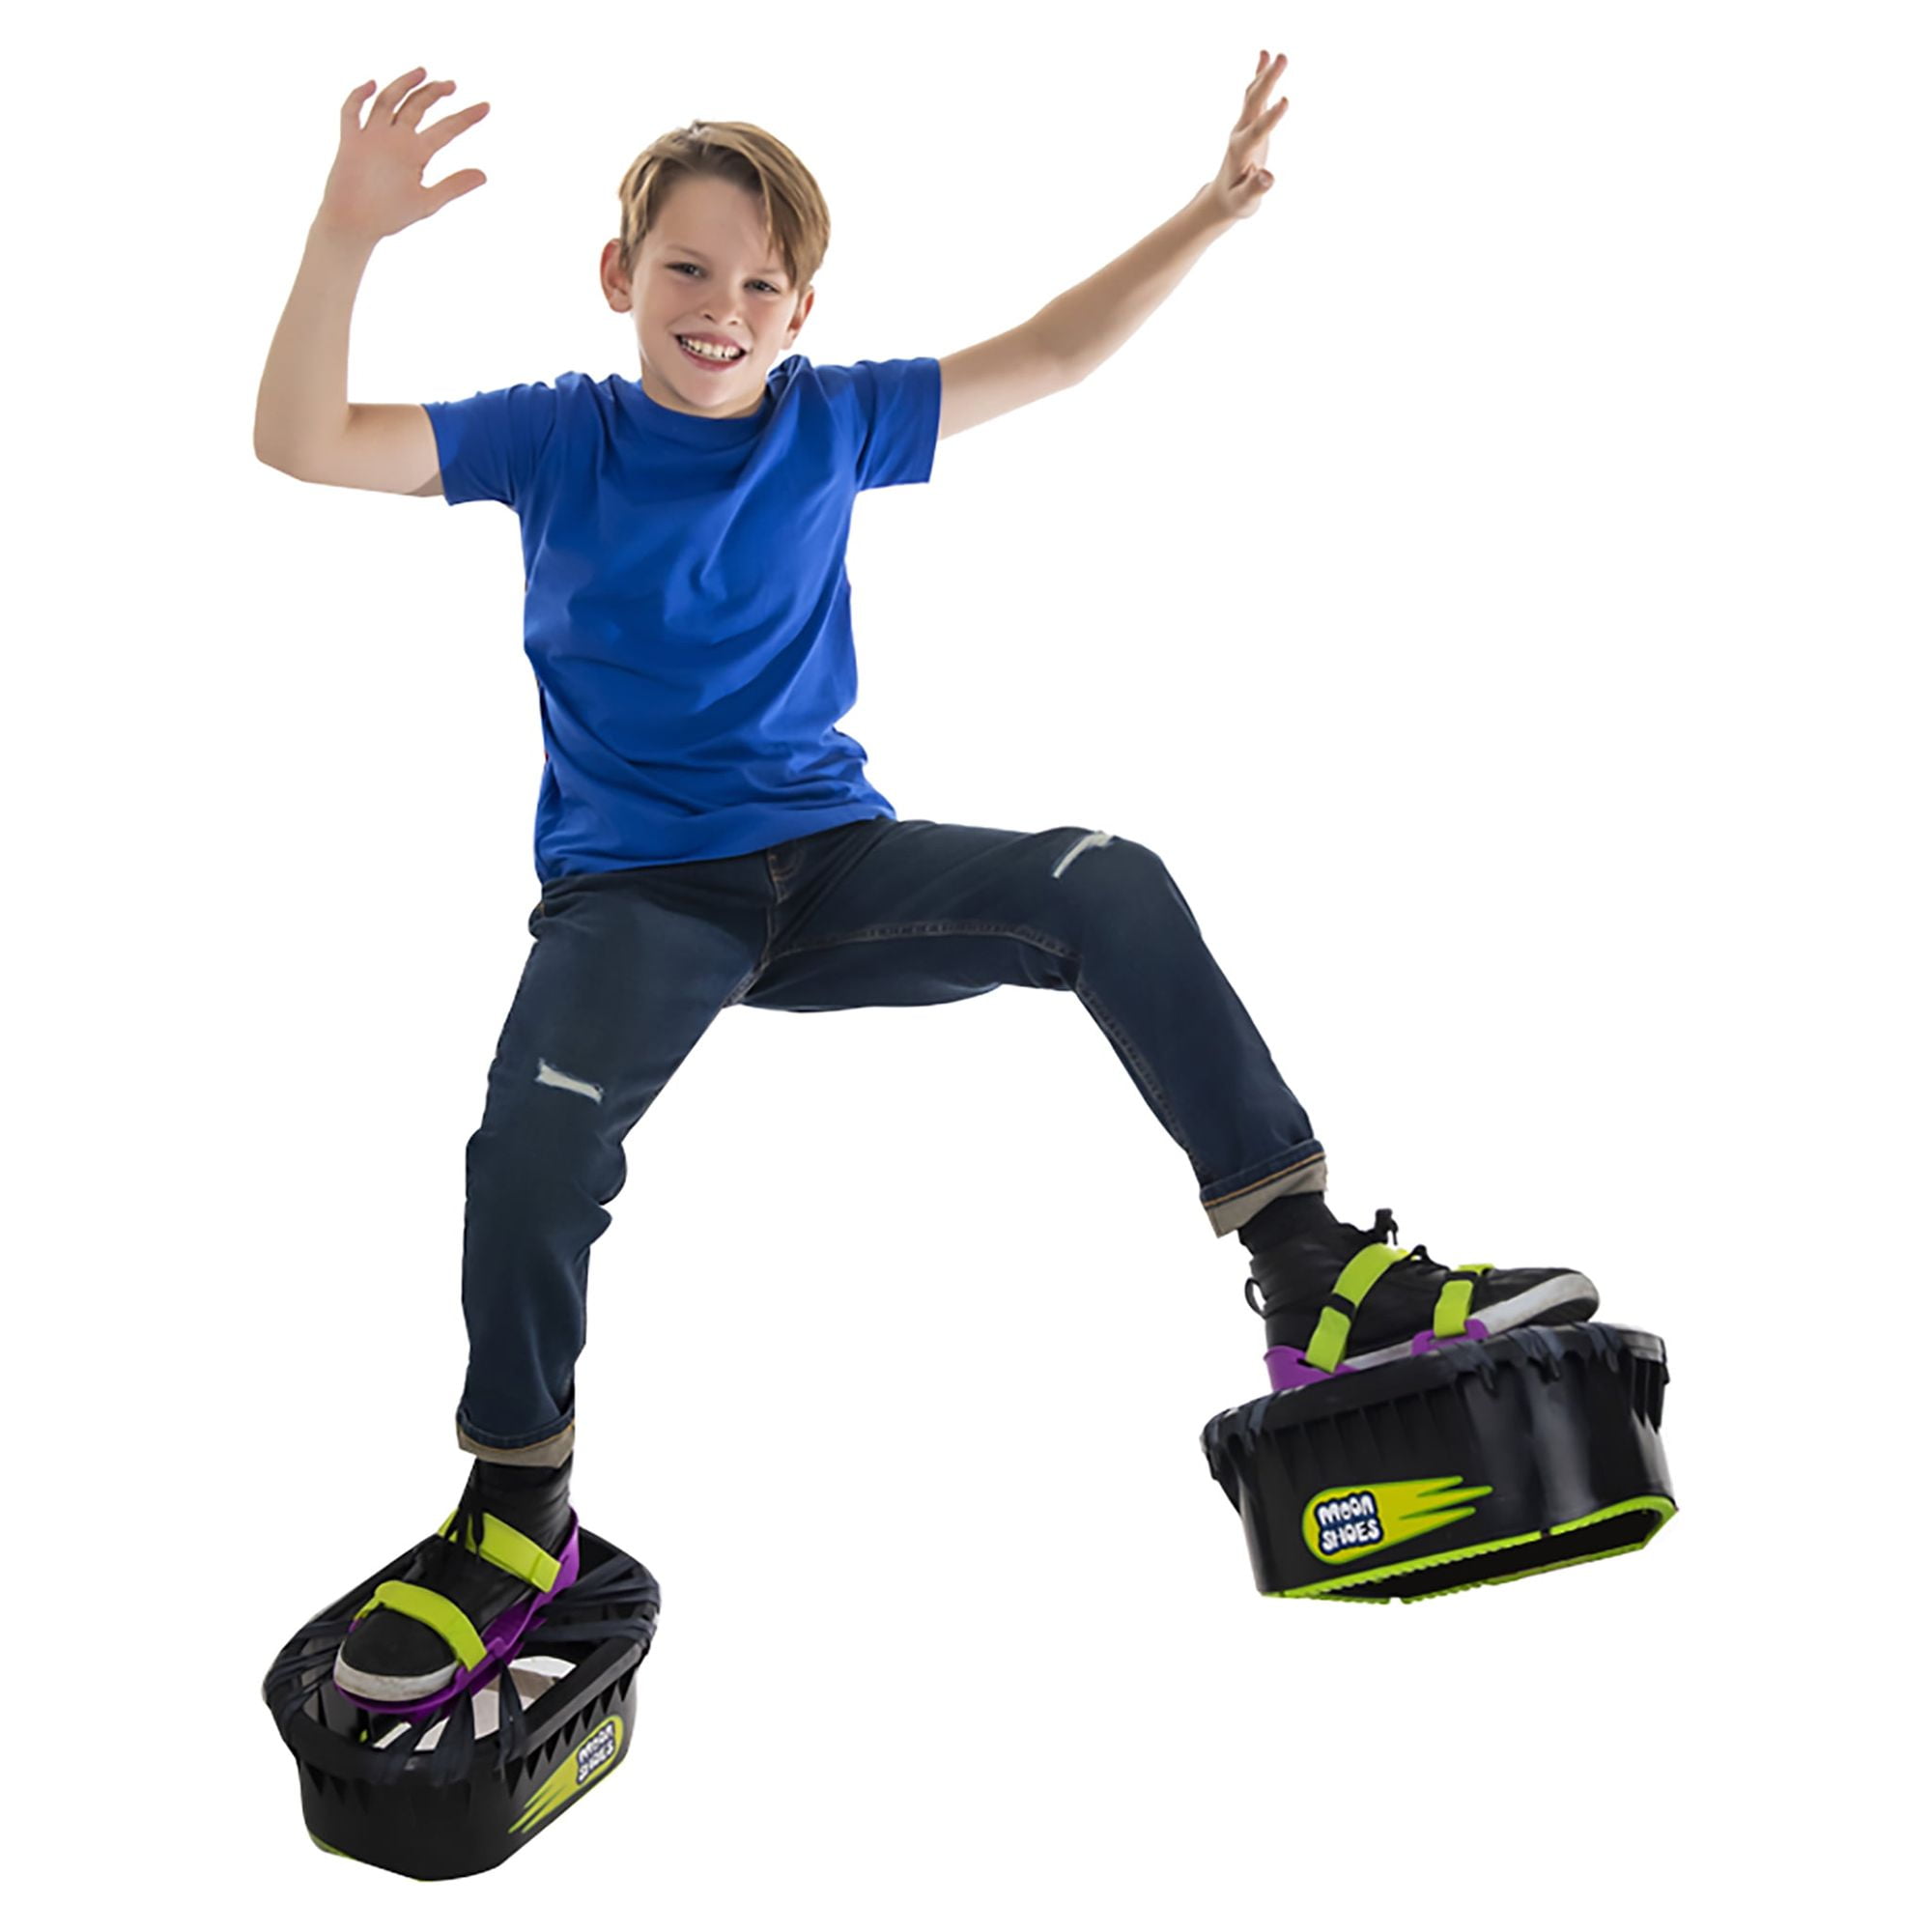 Uncoventional Kira: BOUNCING INTO SUMMER WITH MOON SHOES